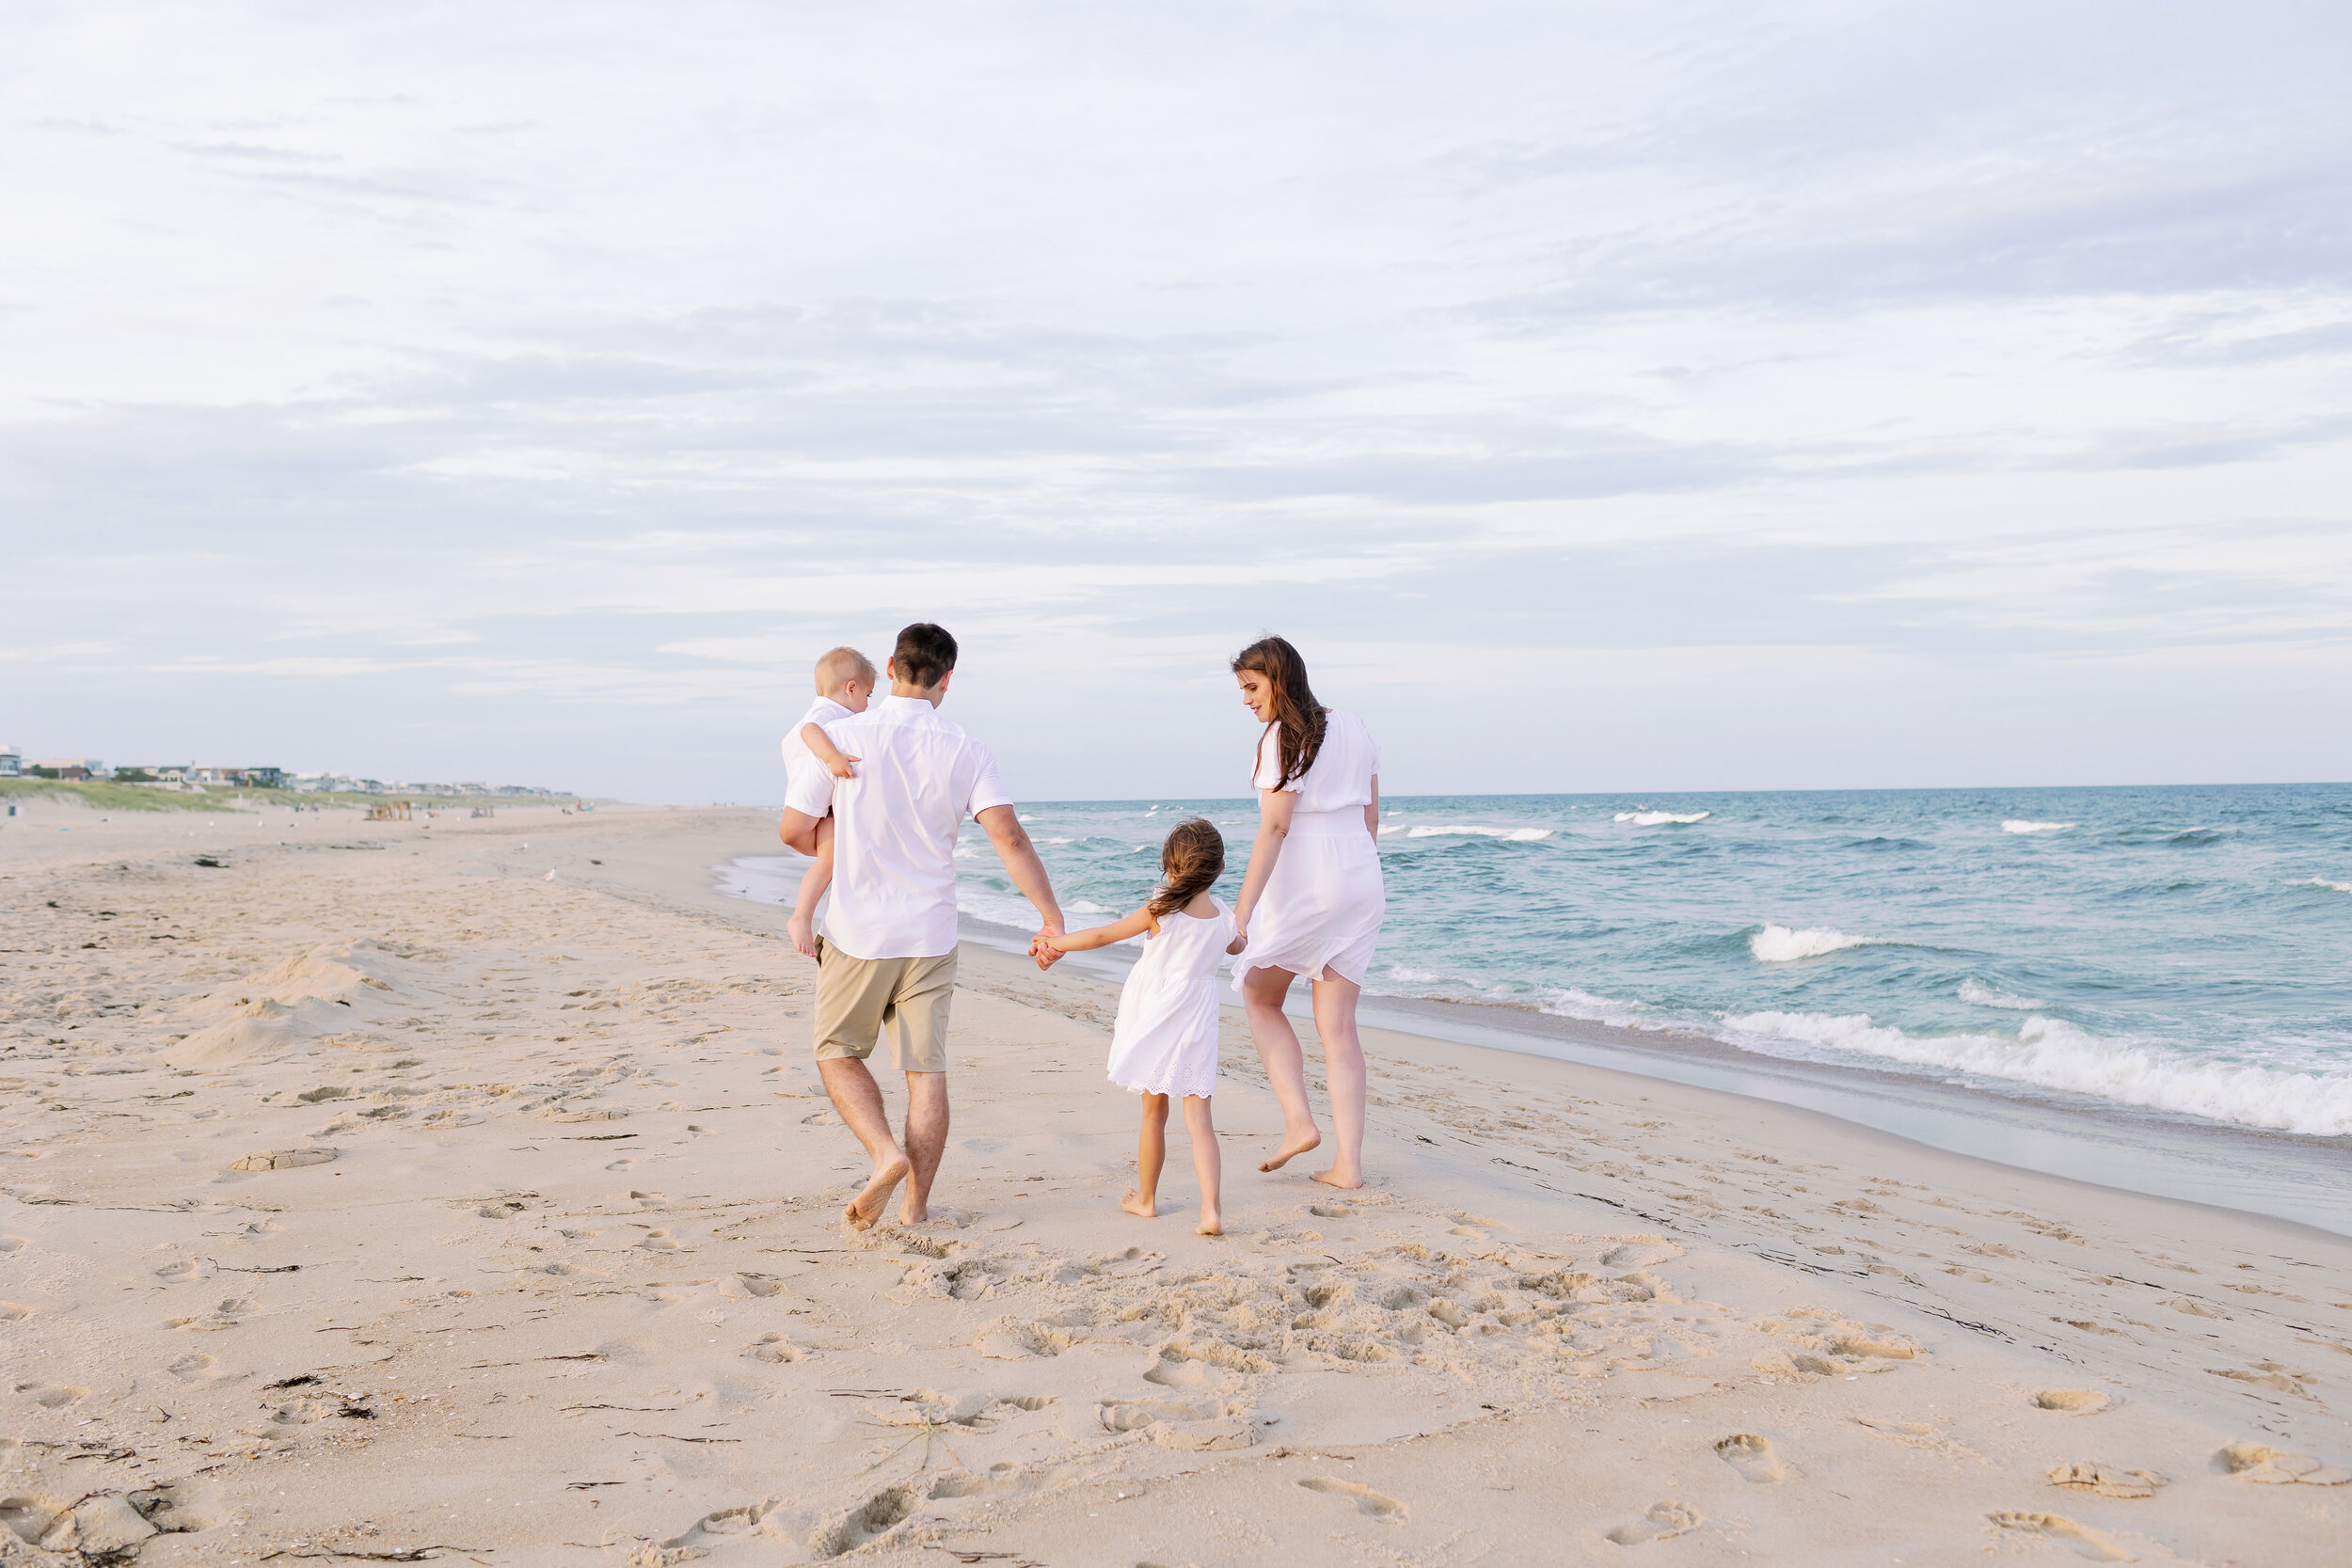 Beach photo ideas: family walking along beach and holding hands during family photos | NKB Photo